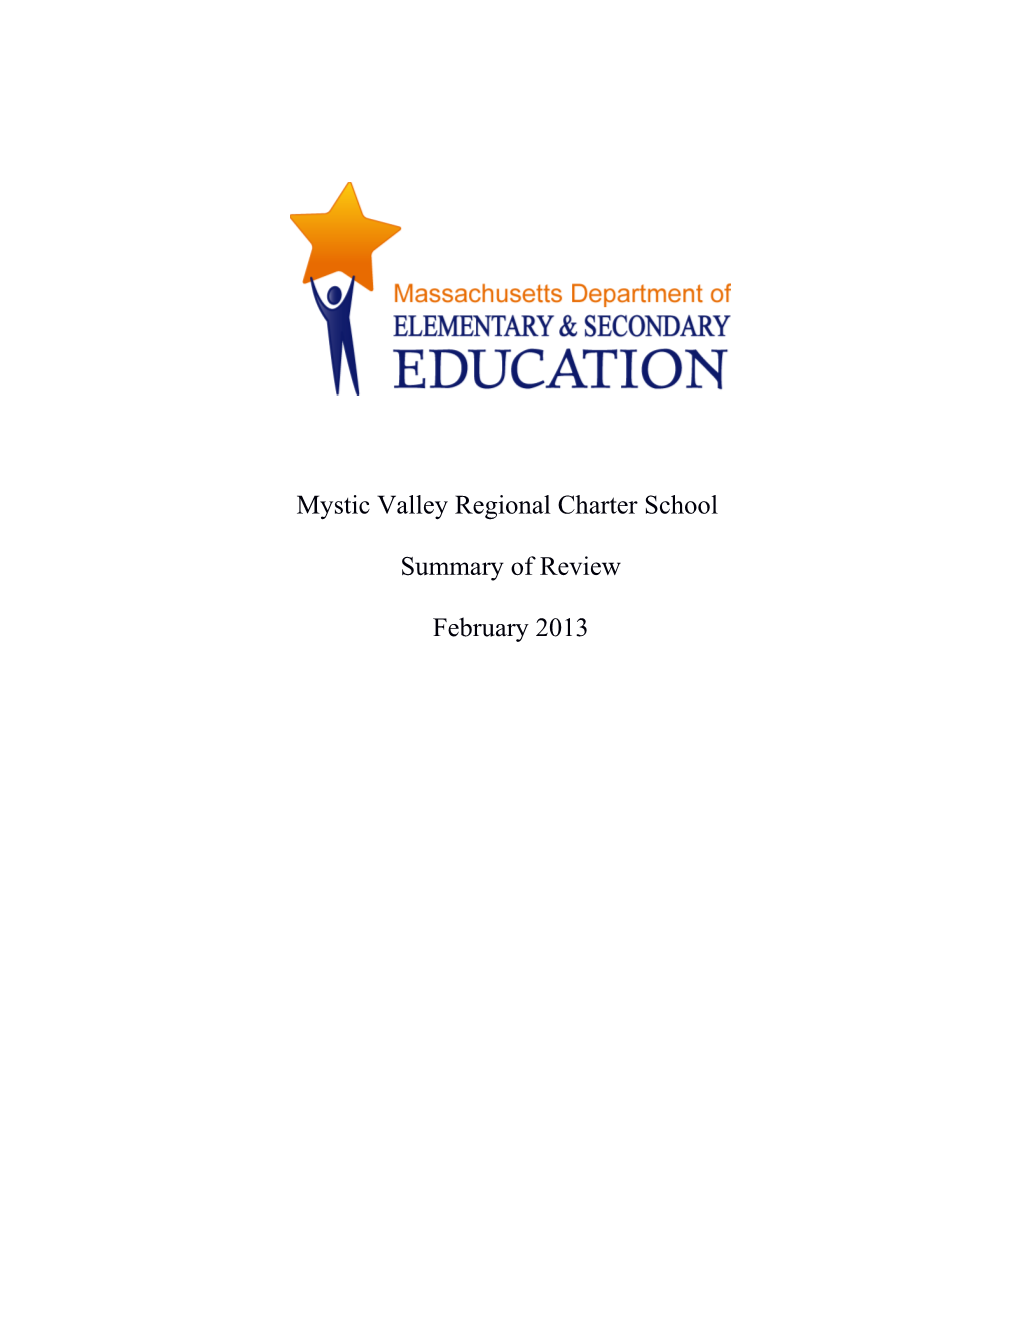 Mystic Valley Regional Charter School Summary of Review February 2013